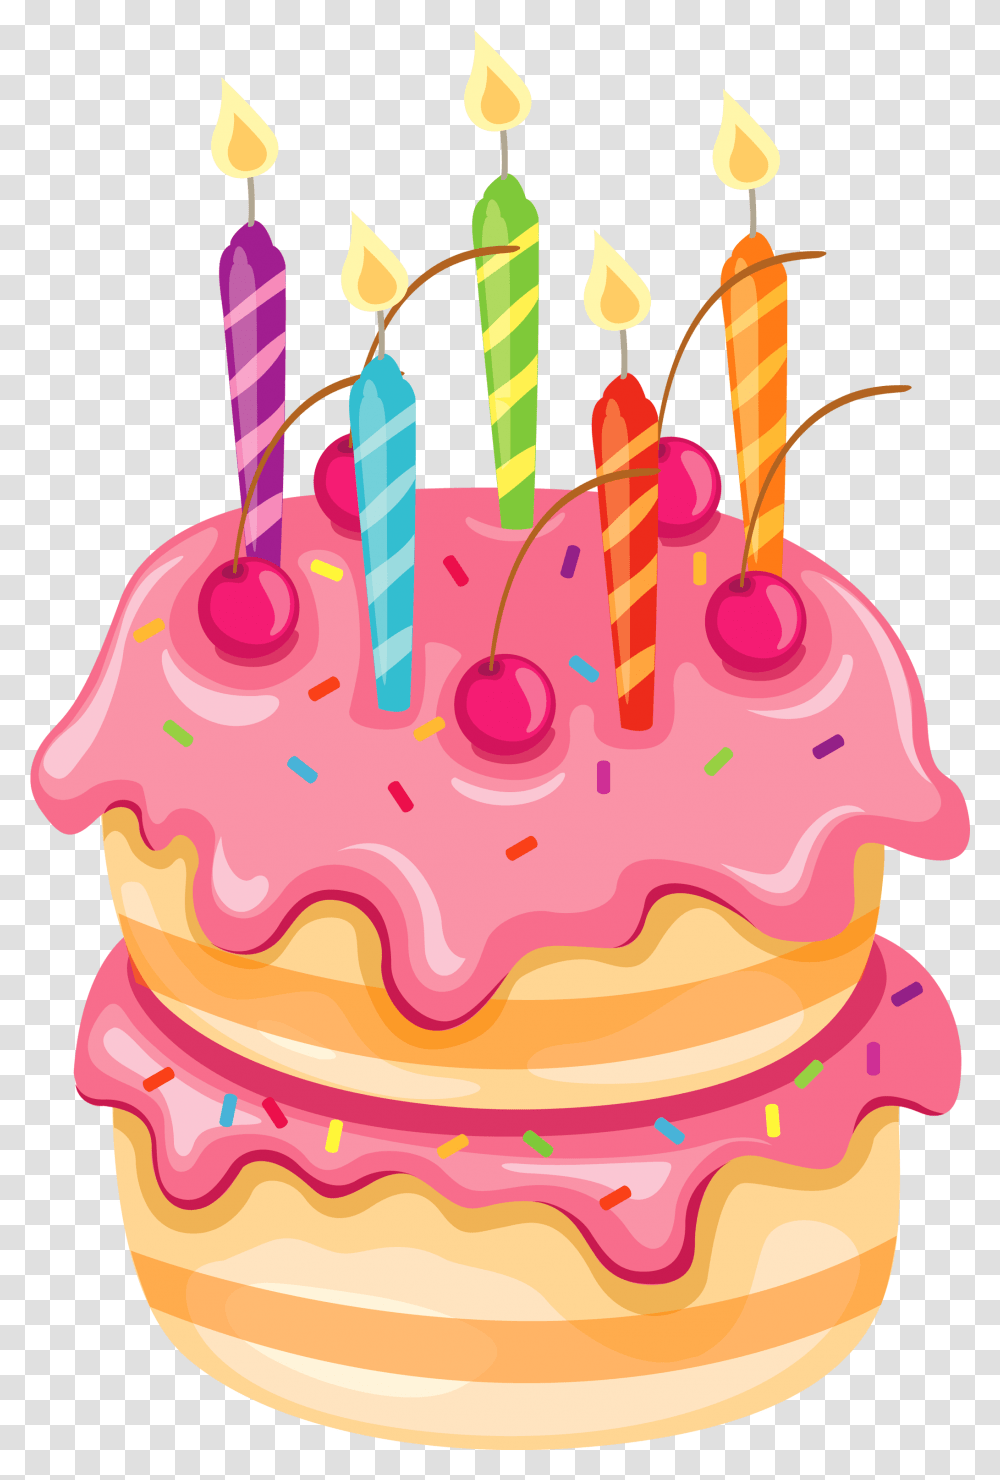 Pink Cake With Candles Clipart Birthday Candle, Dessert, Food, Birthday Cake, Icing Transparent Png